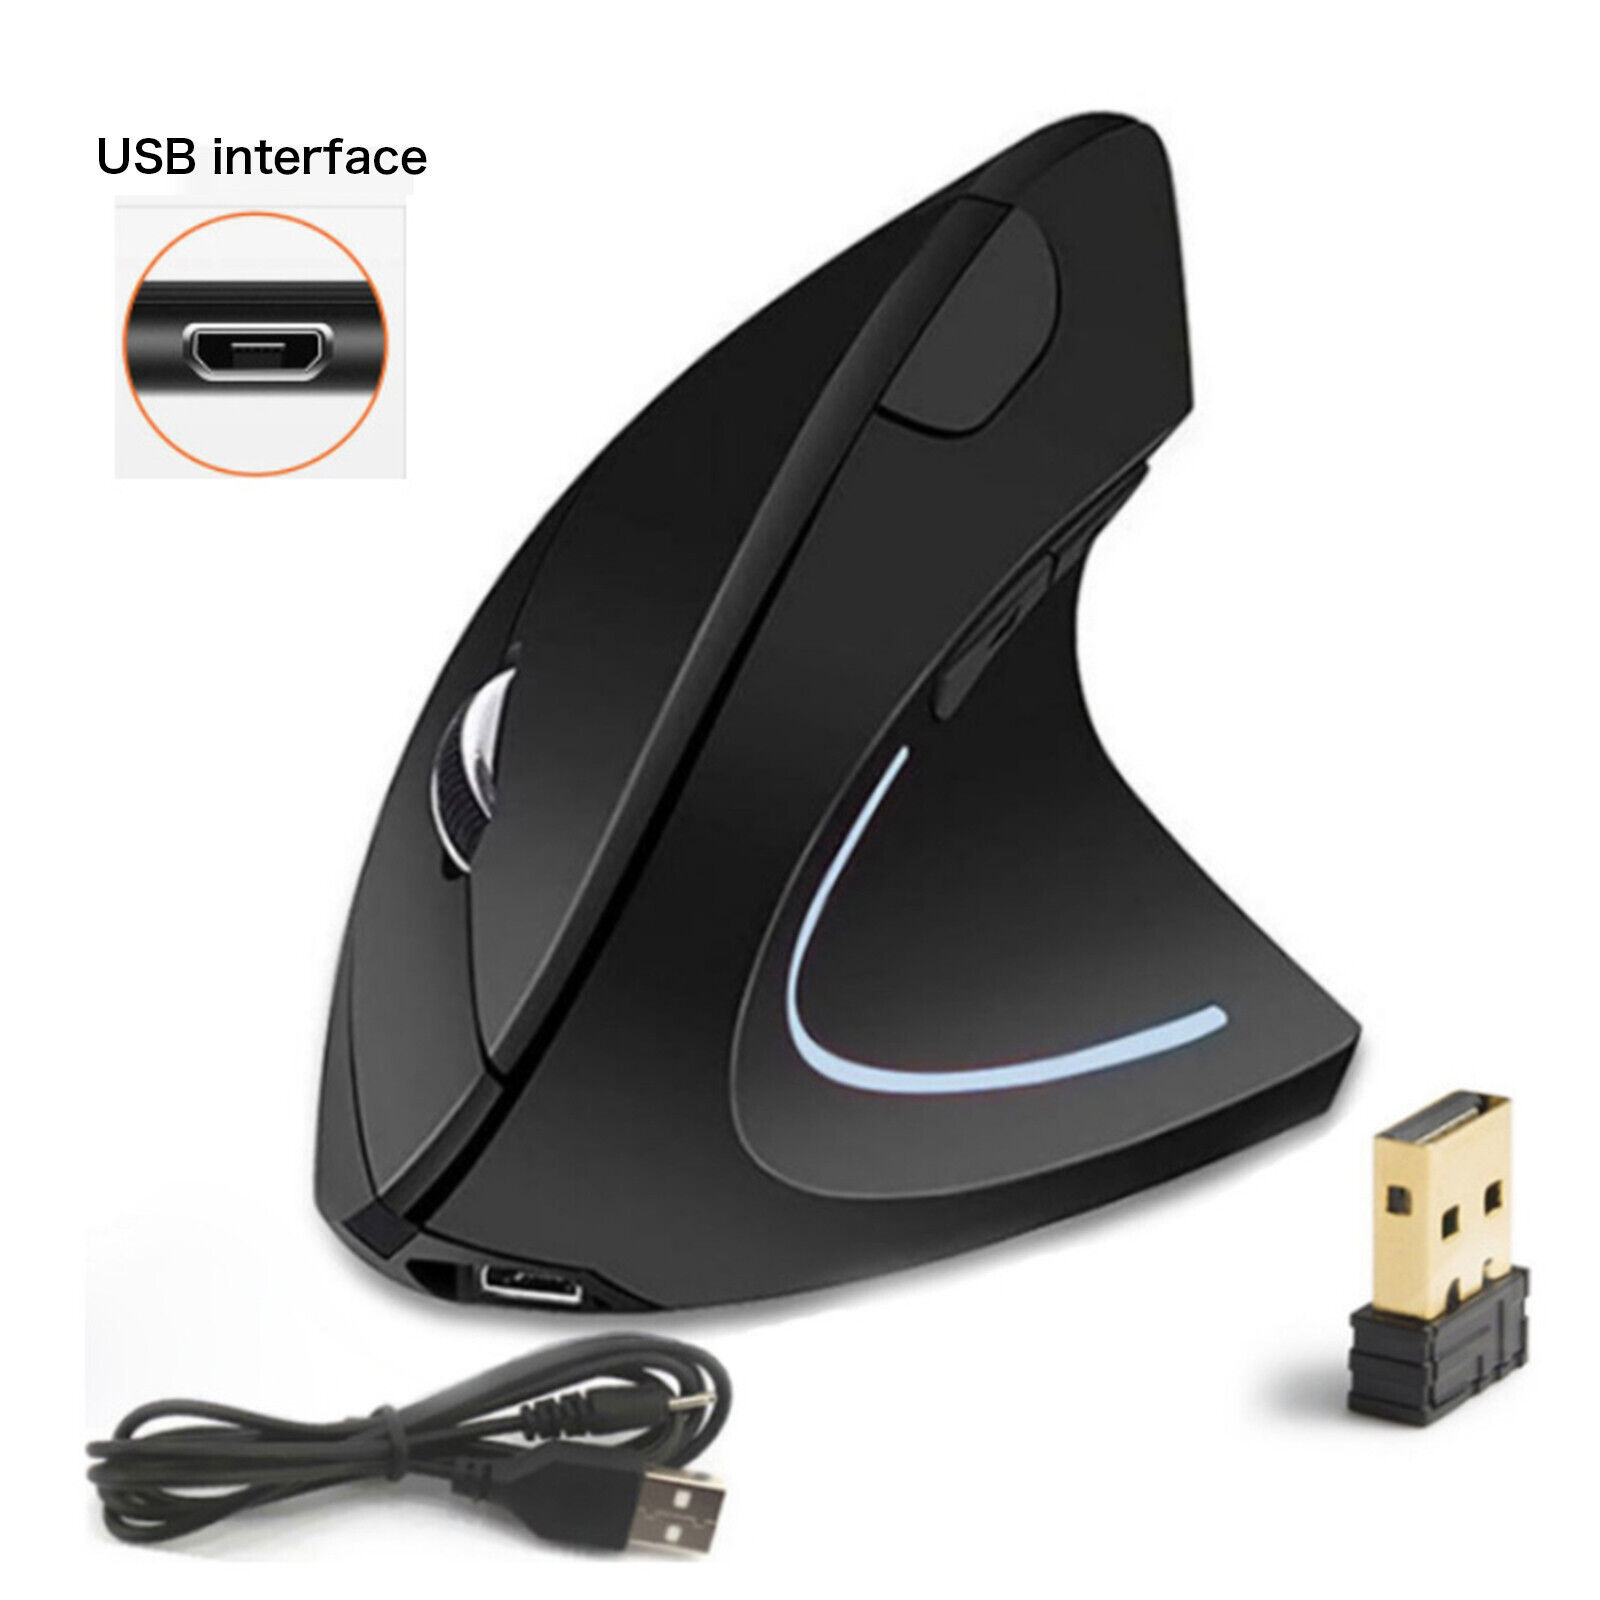 Ergonomic Optical Vertical Mouse 1000/1600 5Key Gaming Mice wirelessRechargeable